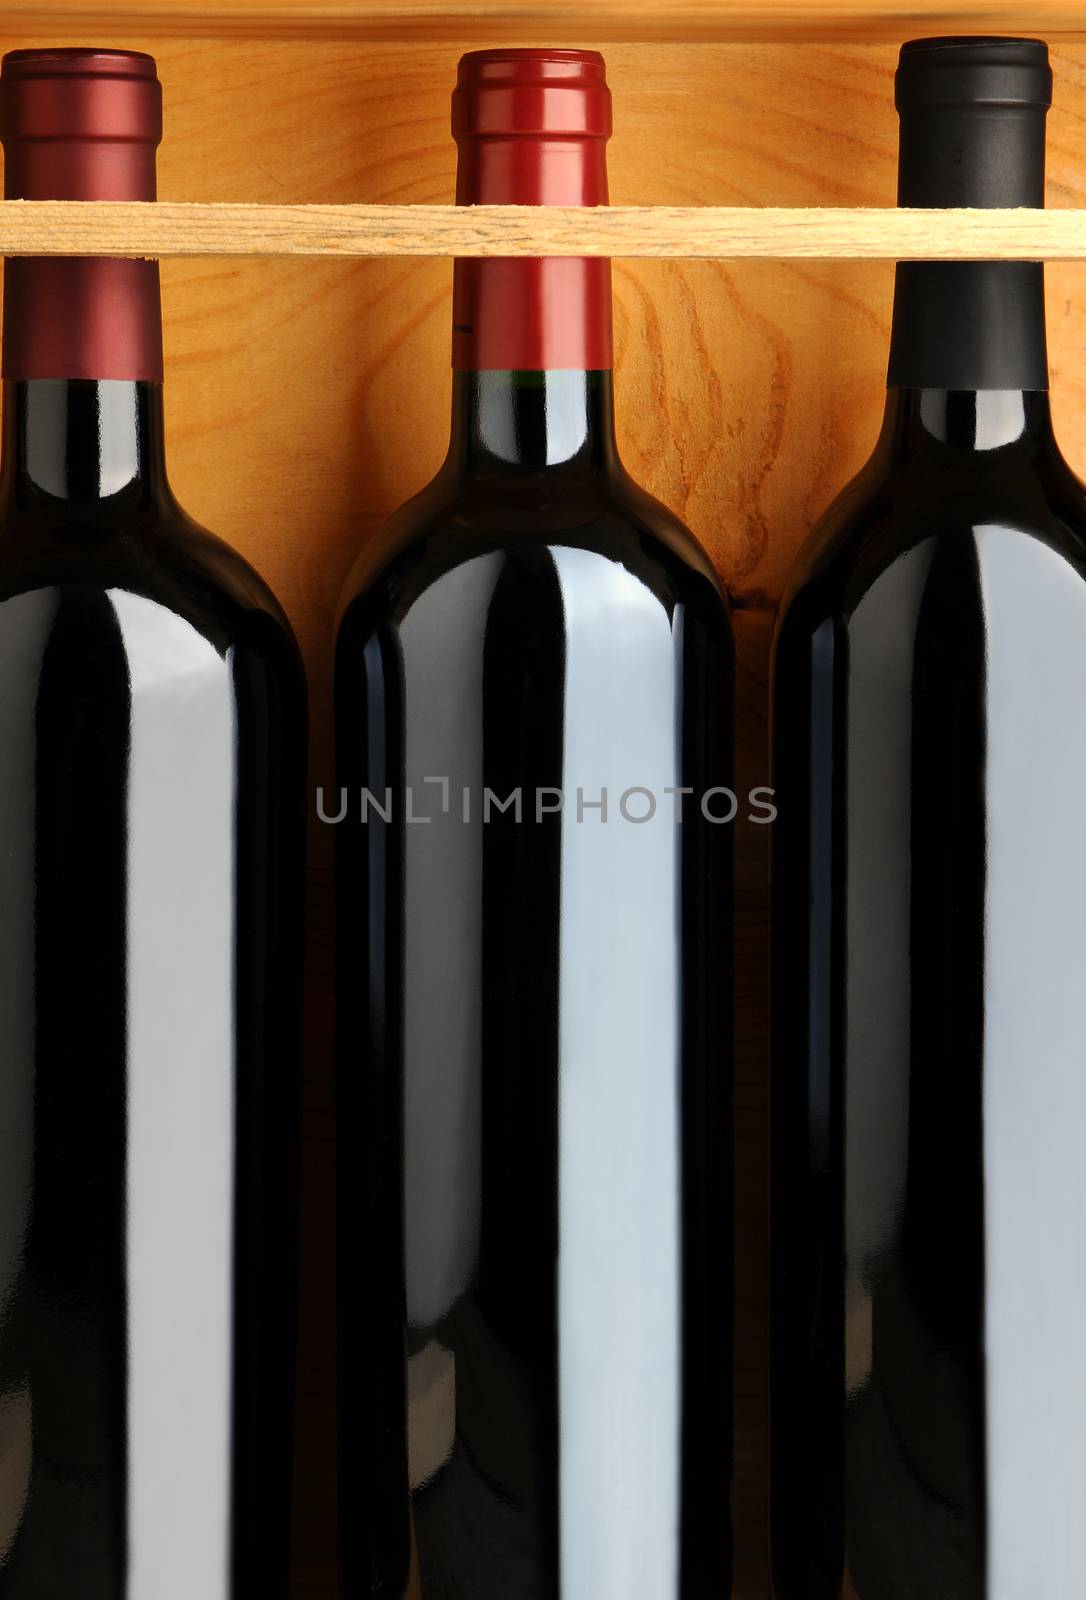 Closeup of three red wine bottles in a wooden case. Vertical format.